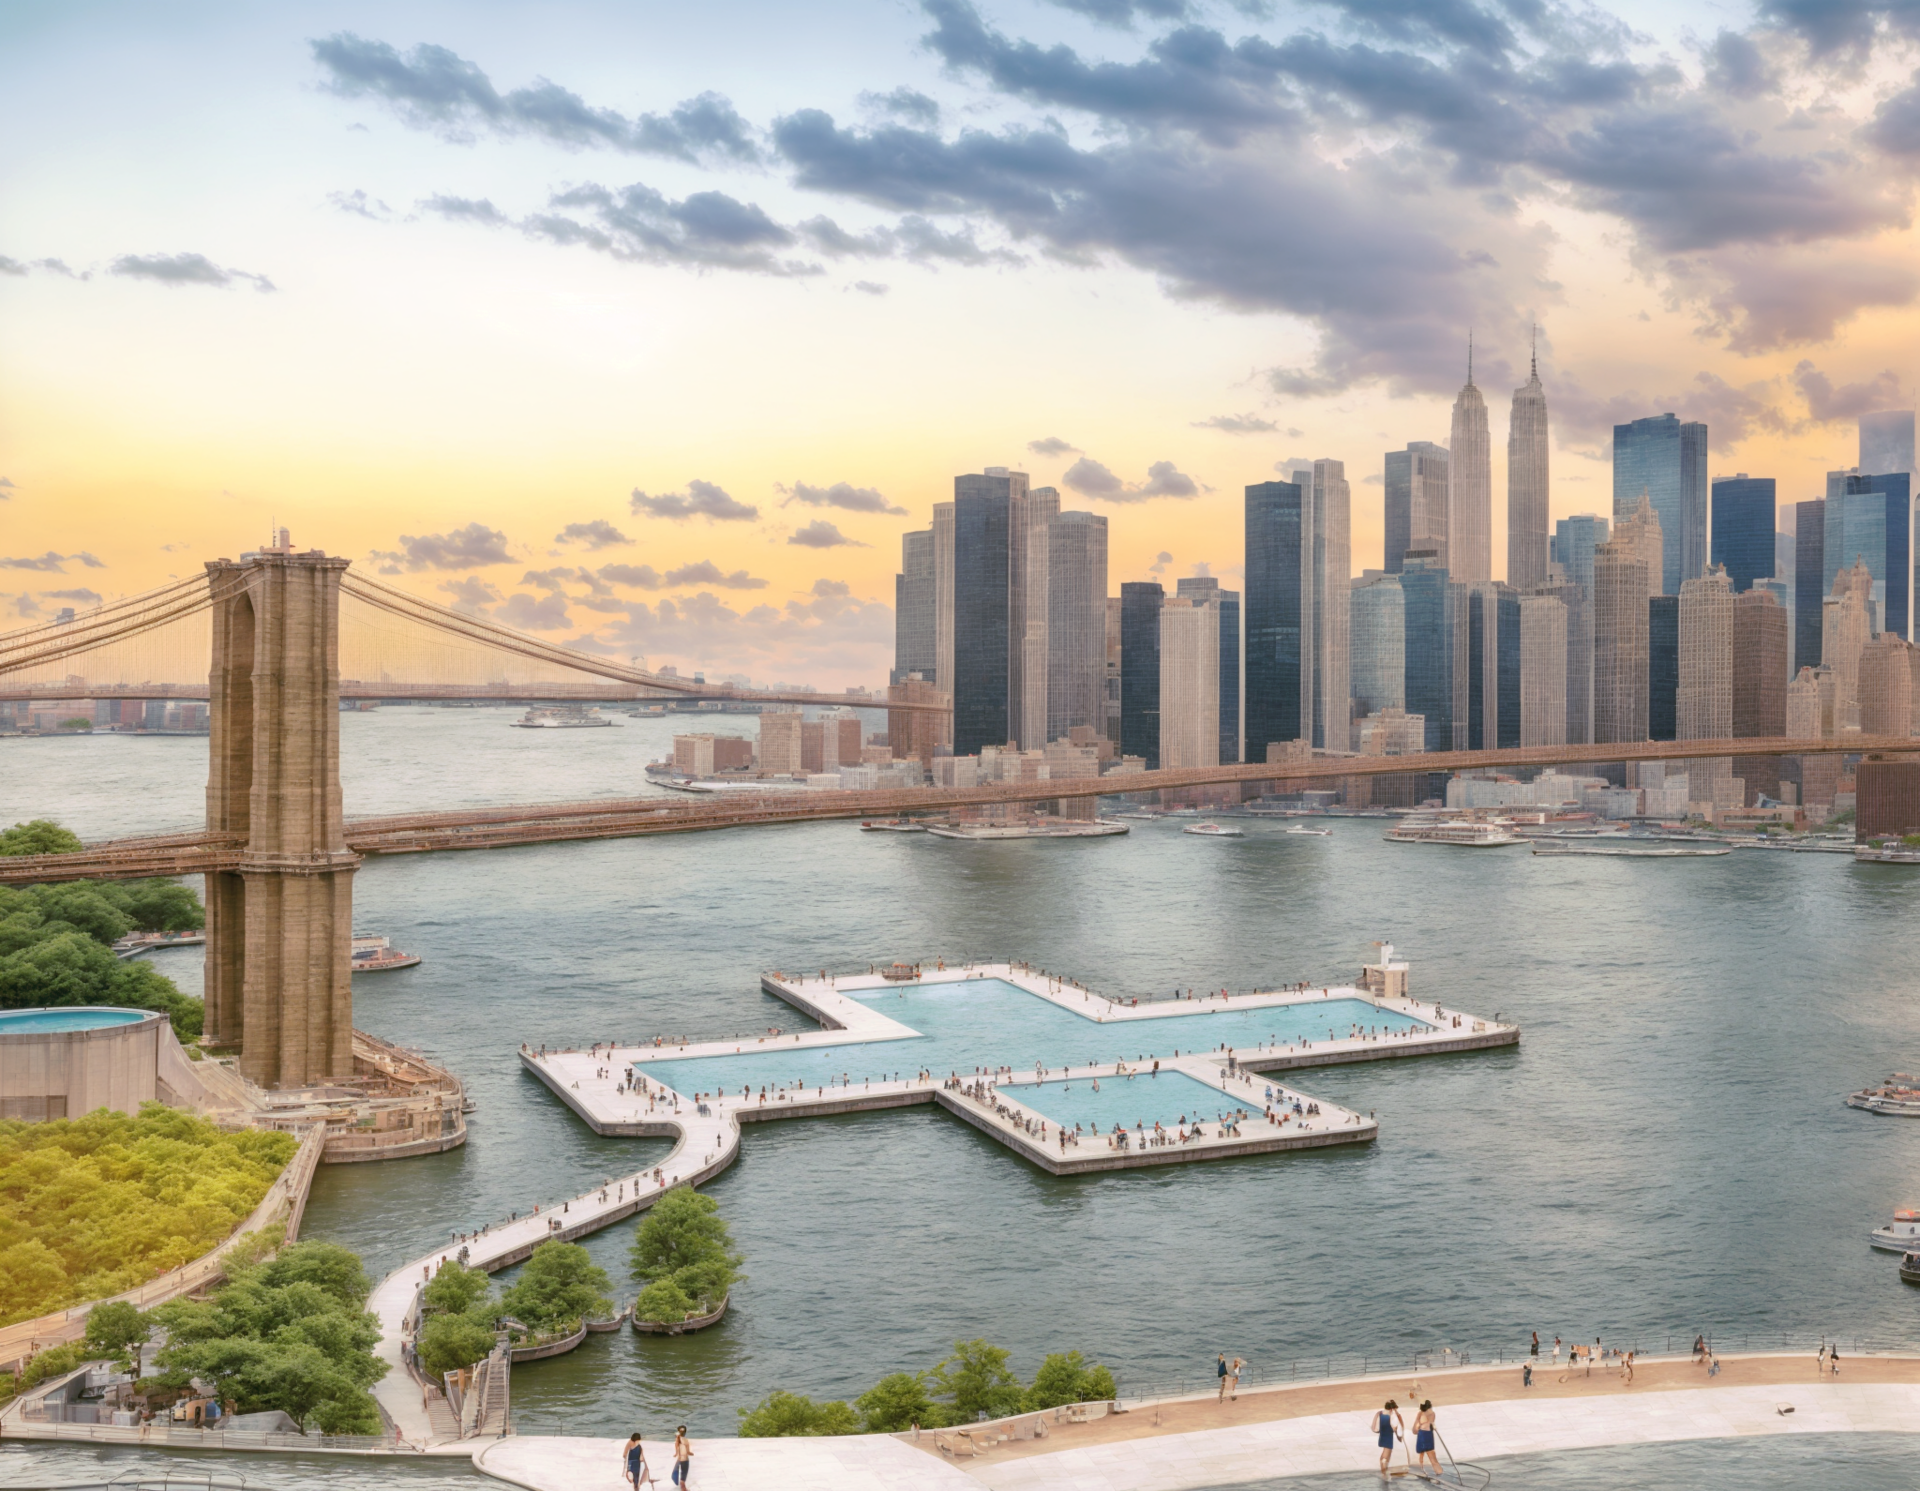 An artist's rendering of the + POOL project in New York, 2024. Designed by Family New York & Playlab, Inc. Image by proto.